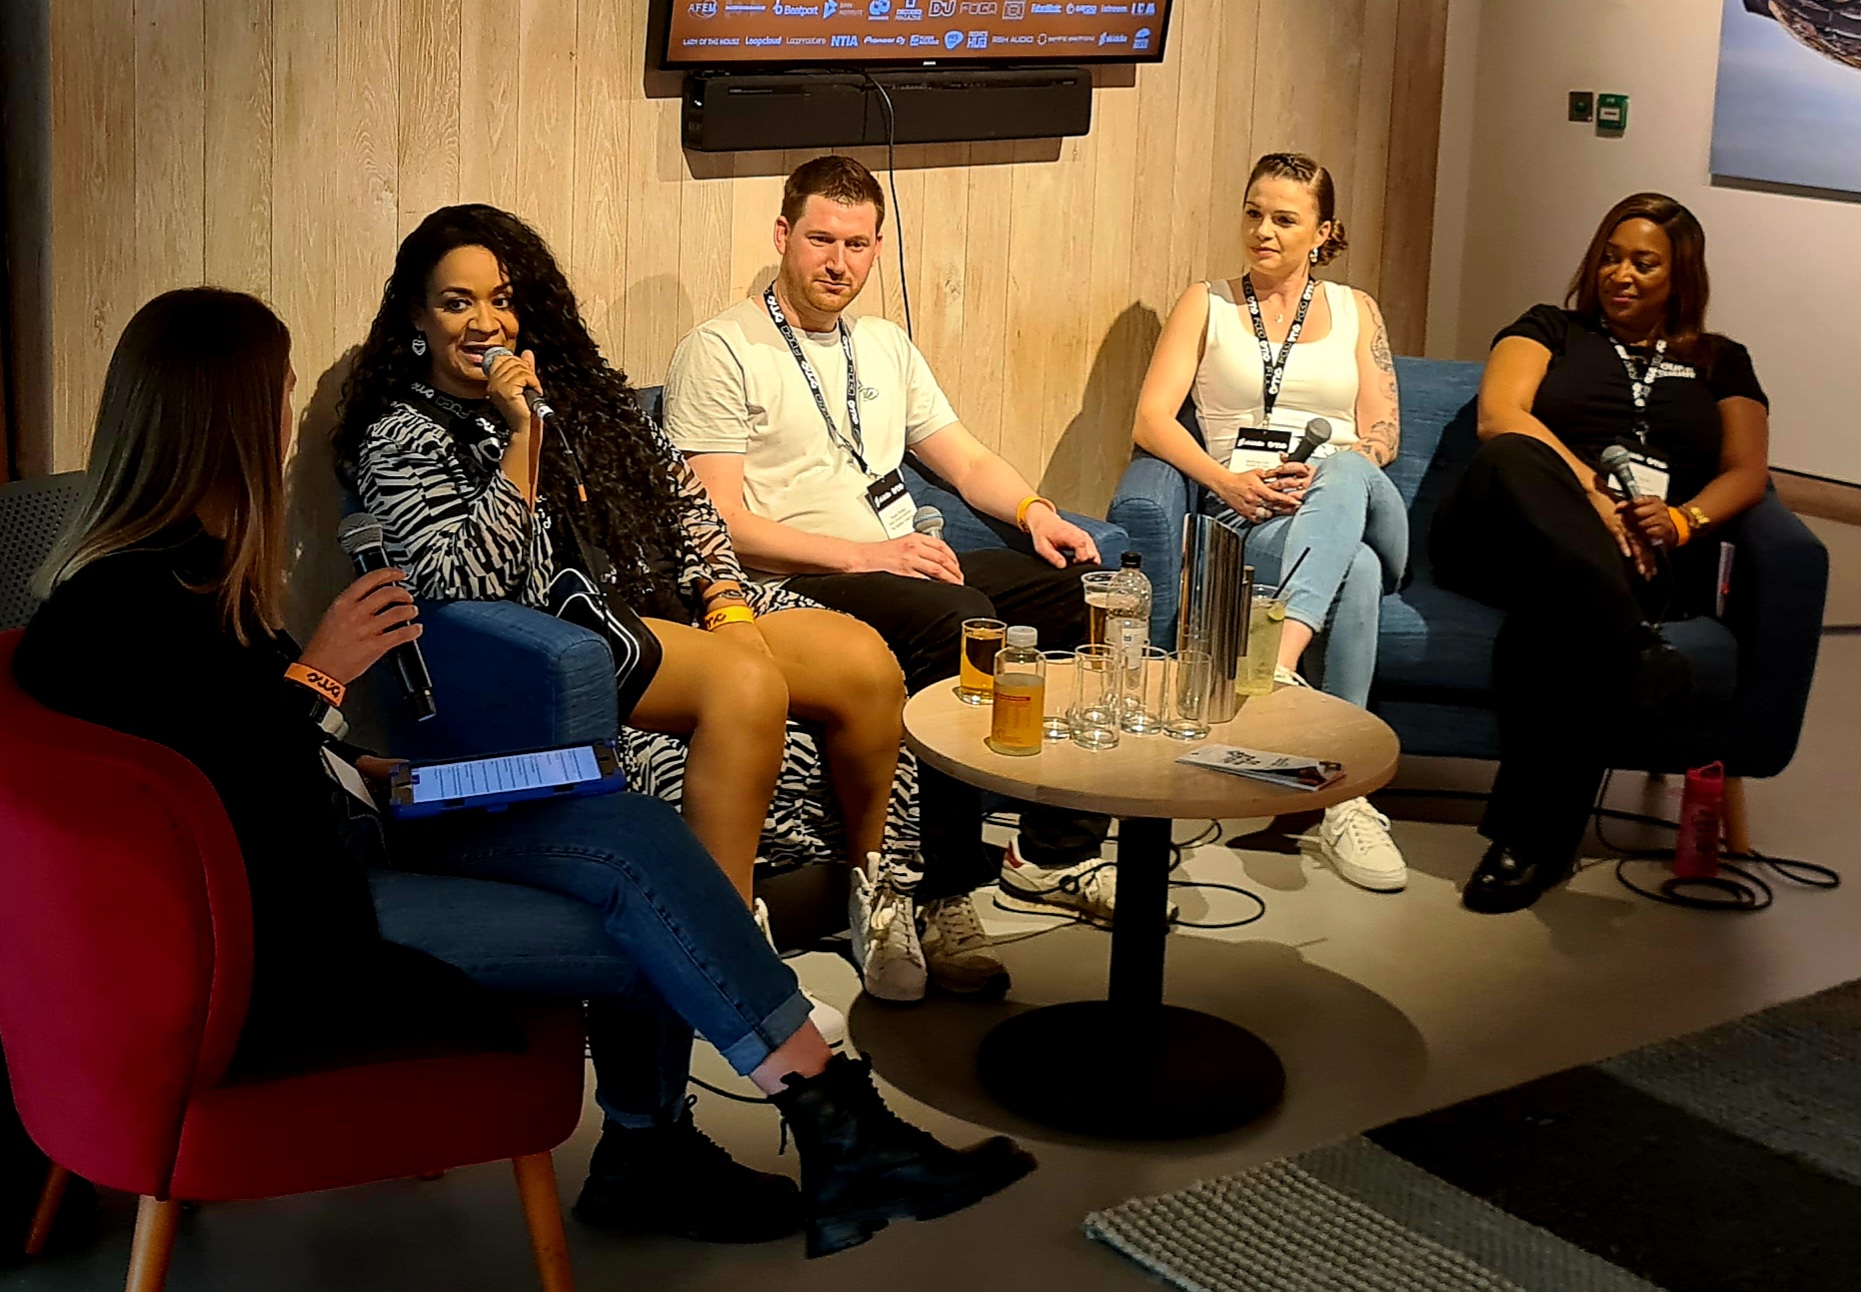 Rowetta Interview at Brighton Music Conference, hosted by Sacha